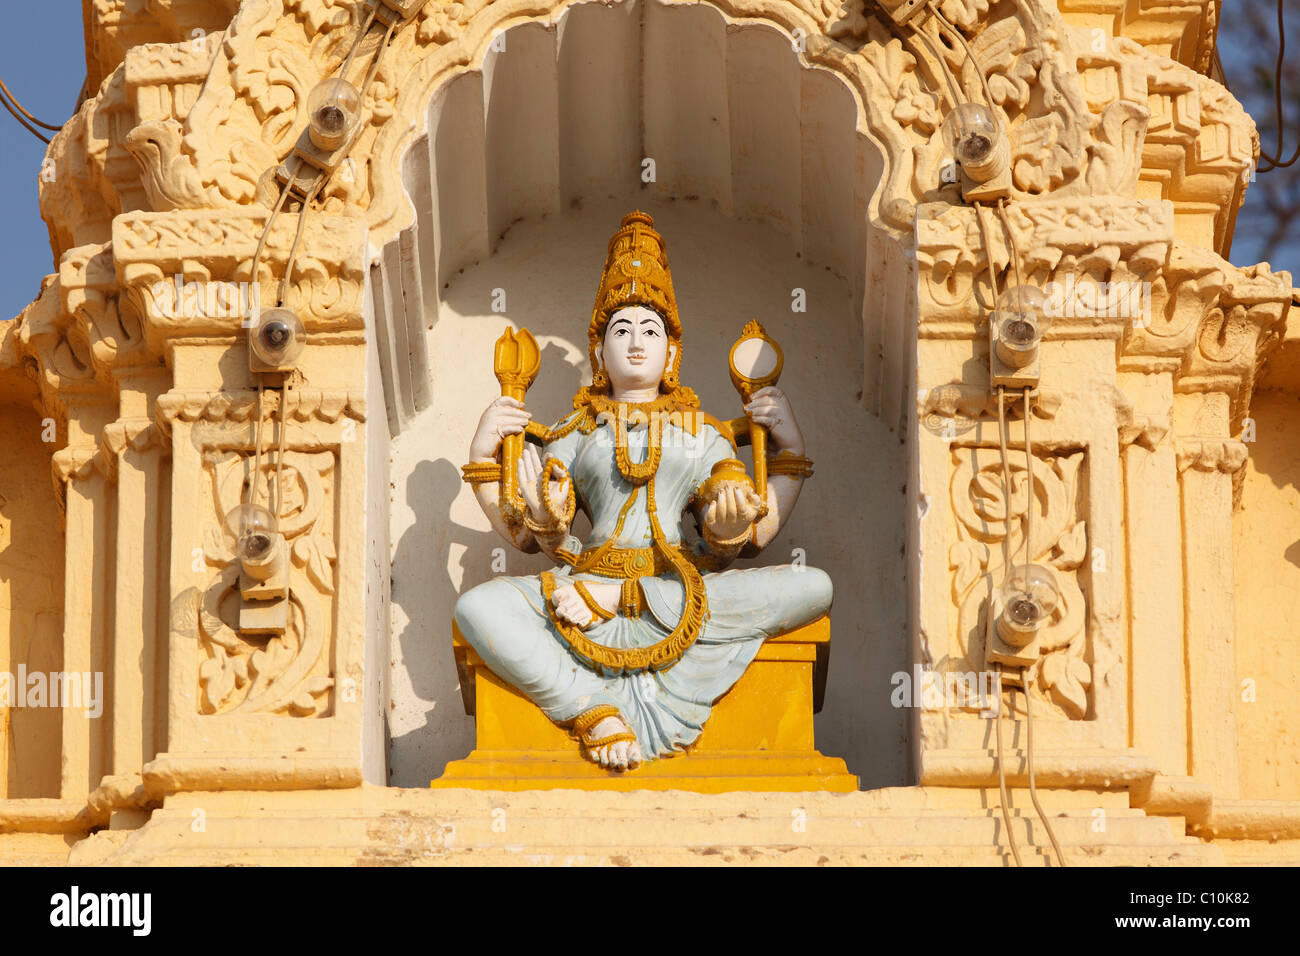 God-figure on the Hindu temple in the garden of Maharaja's Palace, Mysore Palace, , South India, India, South Asia, Asia Stock Photo